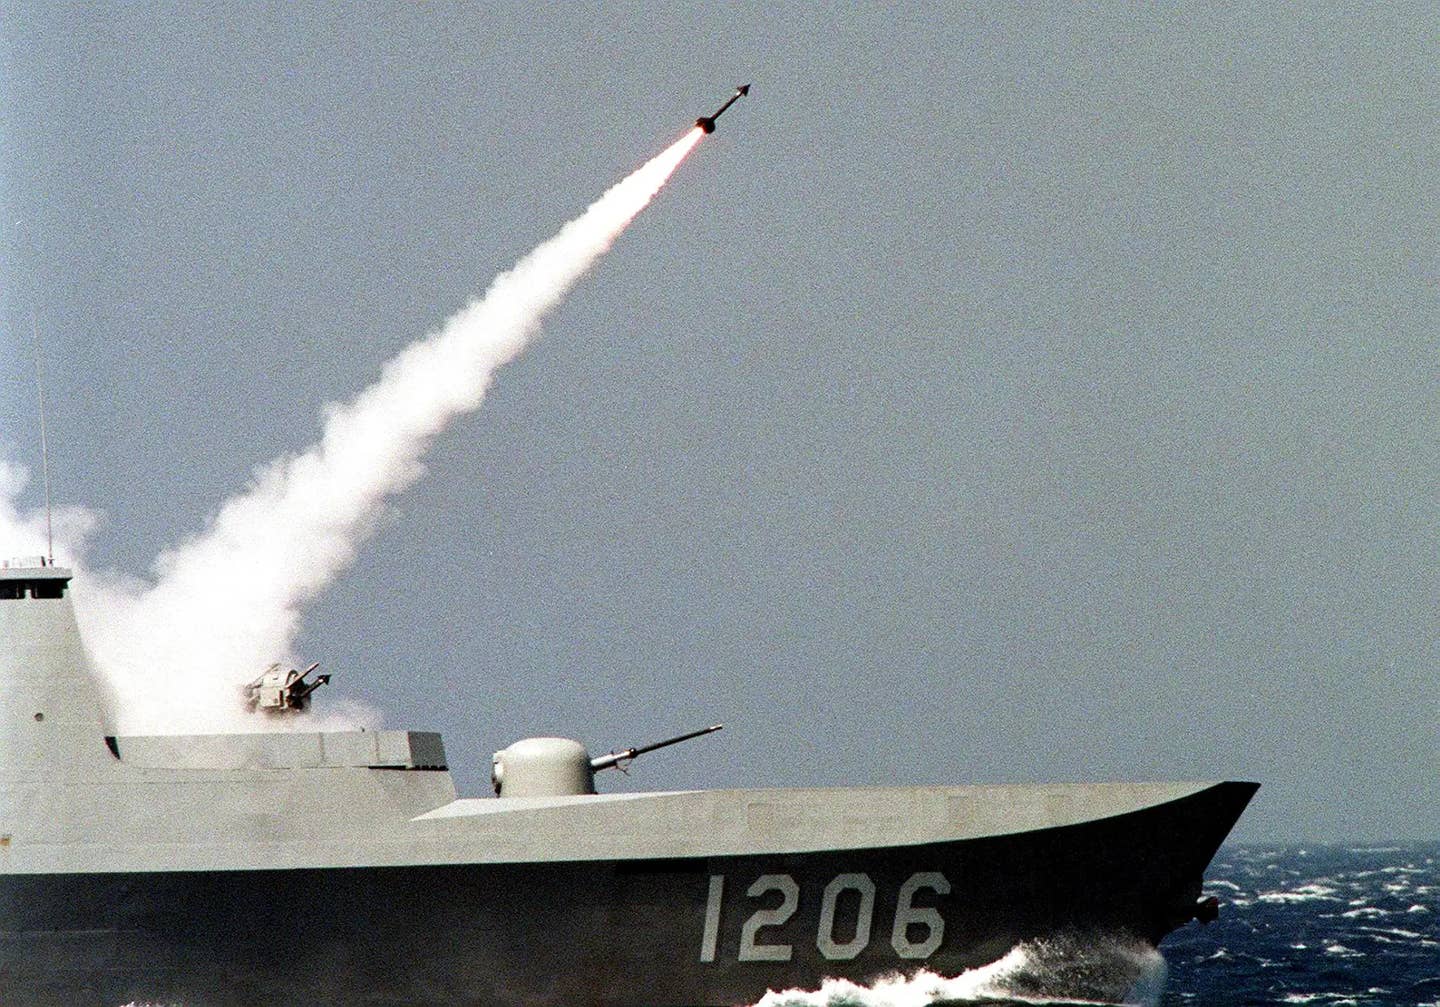 A Sea Chaparral missile is launched from one of Taiwan's six French-made <em>Lafayette</em> class frigates (also known as the <em>Kang Ding</em> class) during an exercise. <em>TAO-CHUAN YEH/AFP via Getty Images </em>